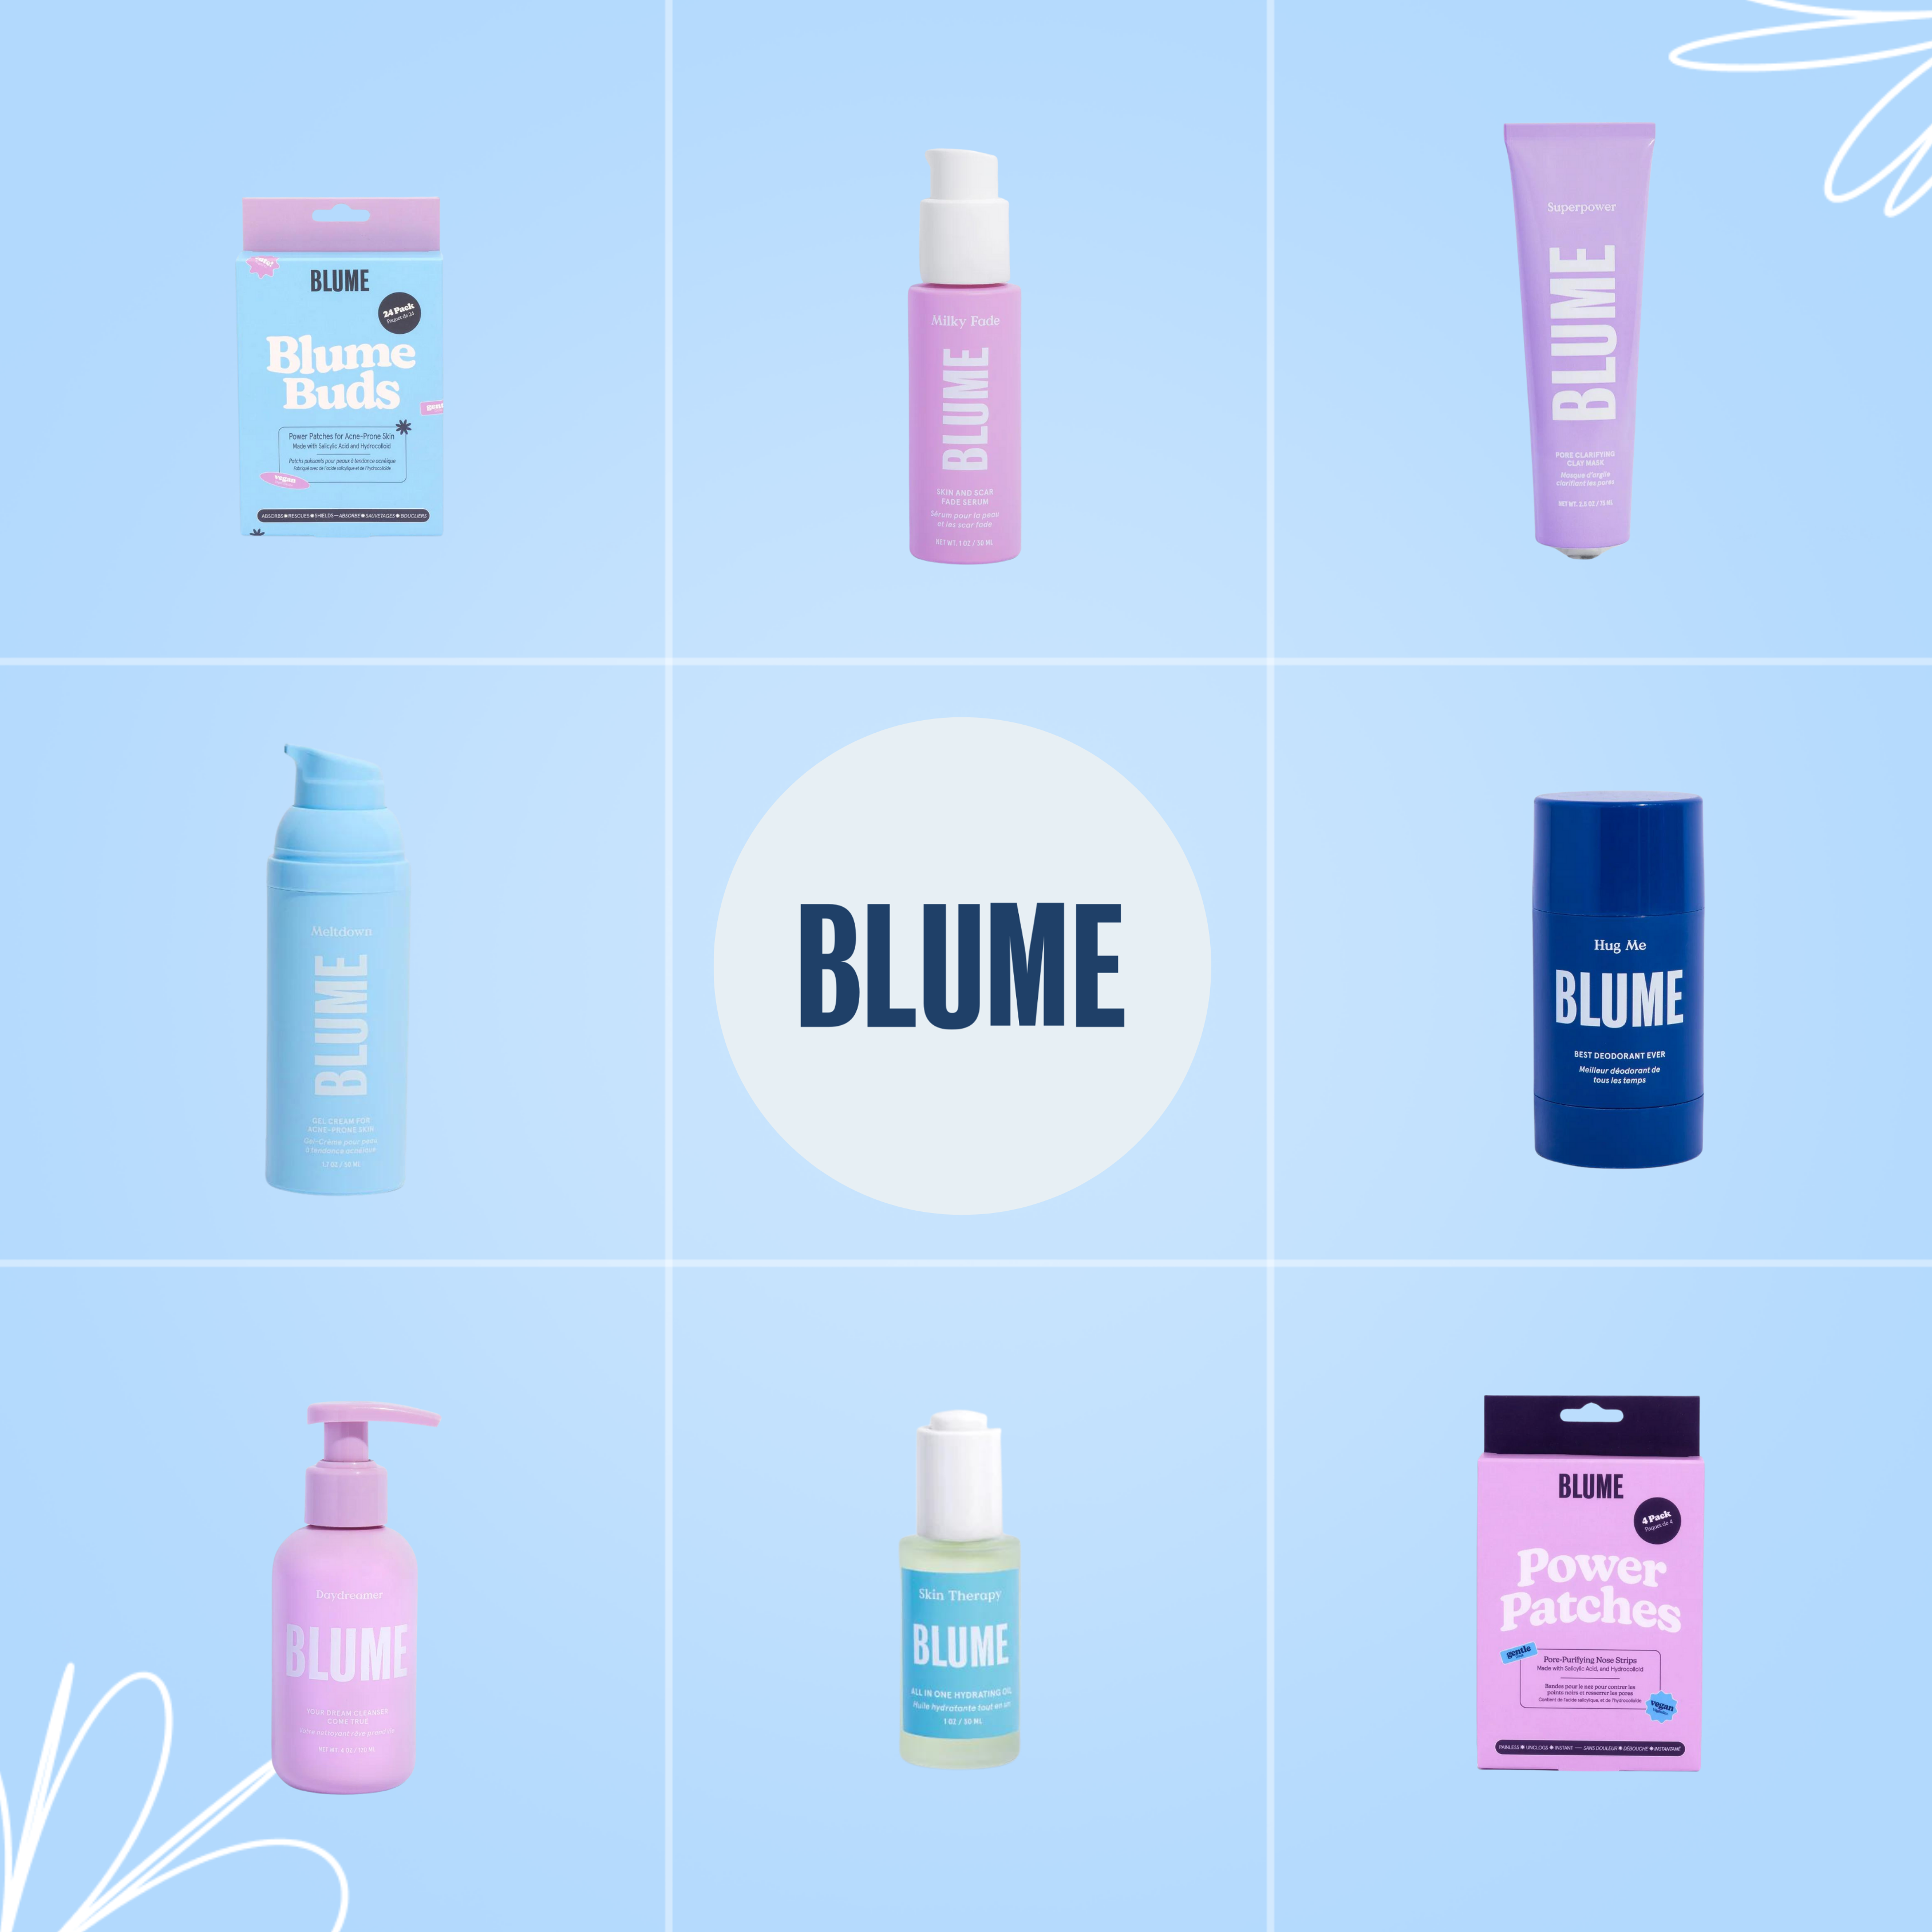 Brand image for Blume